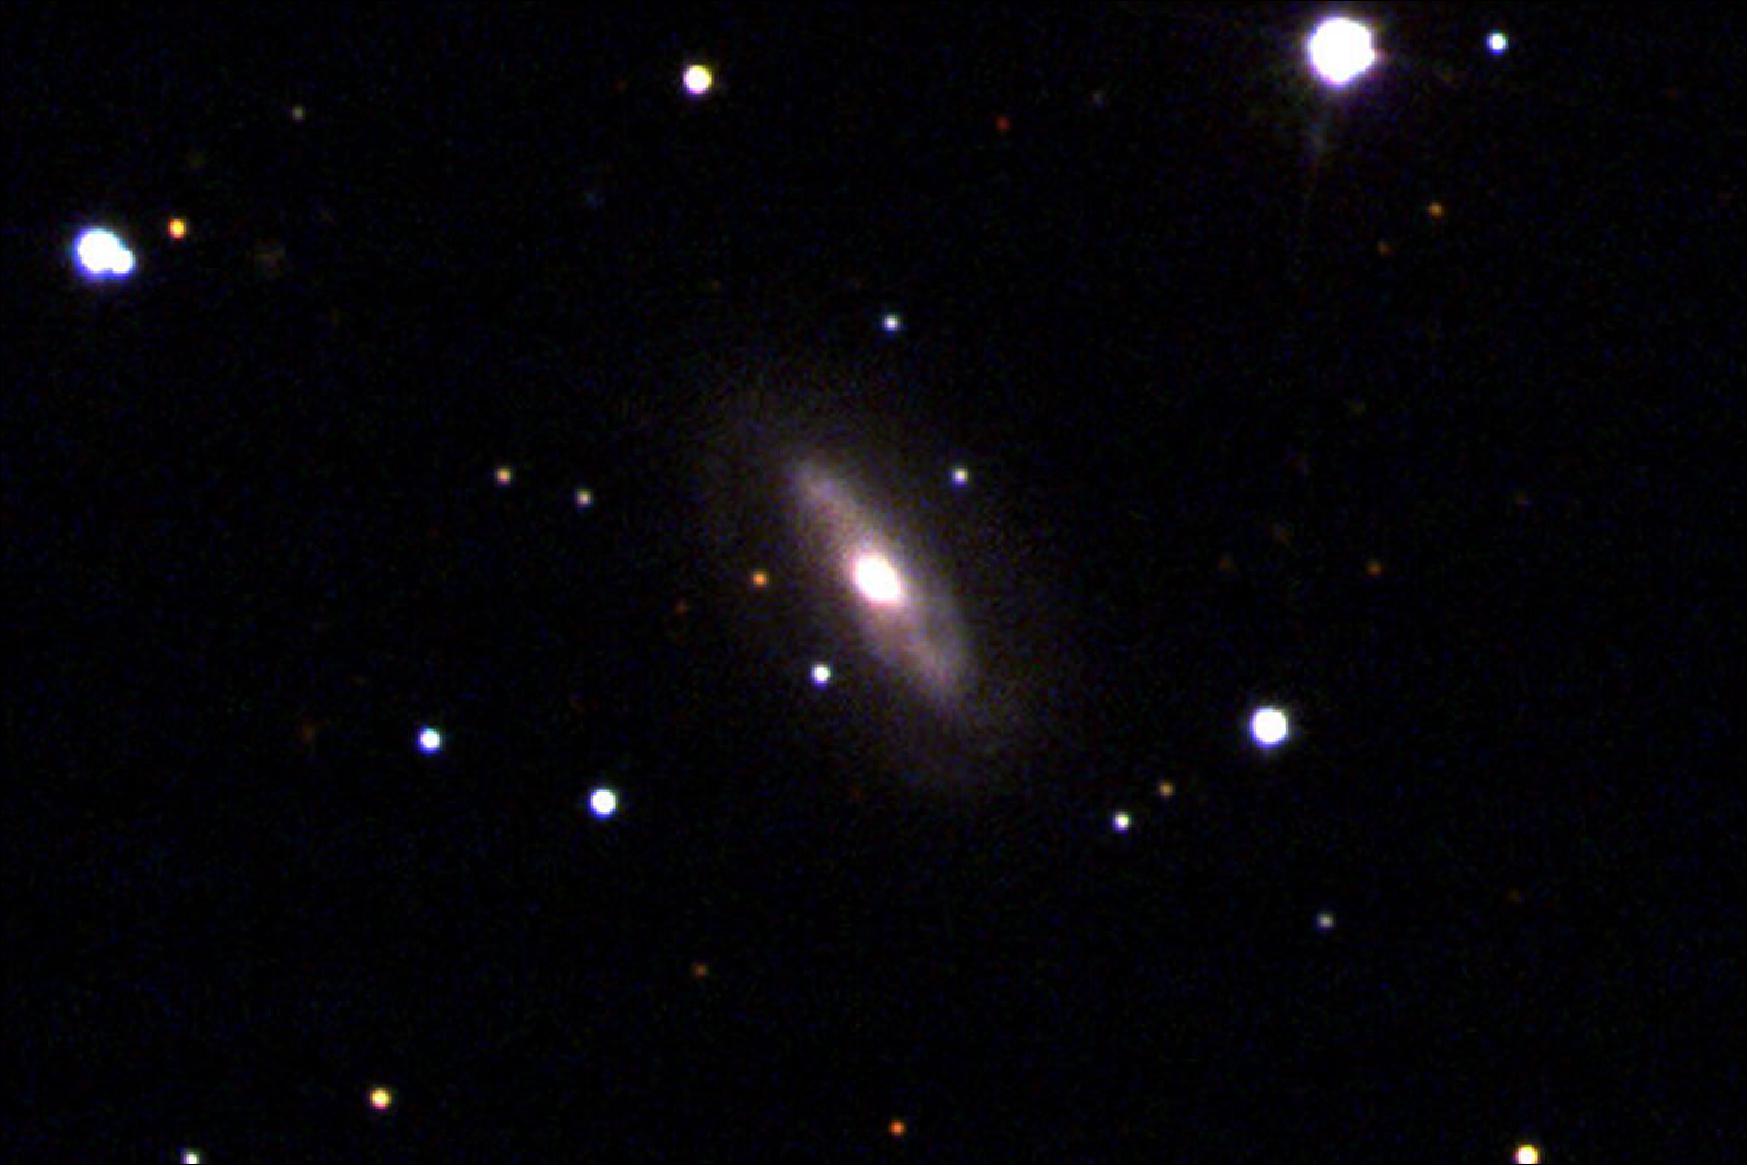 Figure 8: The Galaxy J0437+2456 is thought to be home to a supermassive, moving black hole [image credit: Sloan Digital Sky Survey (SDSS)]